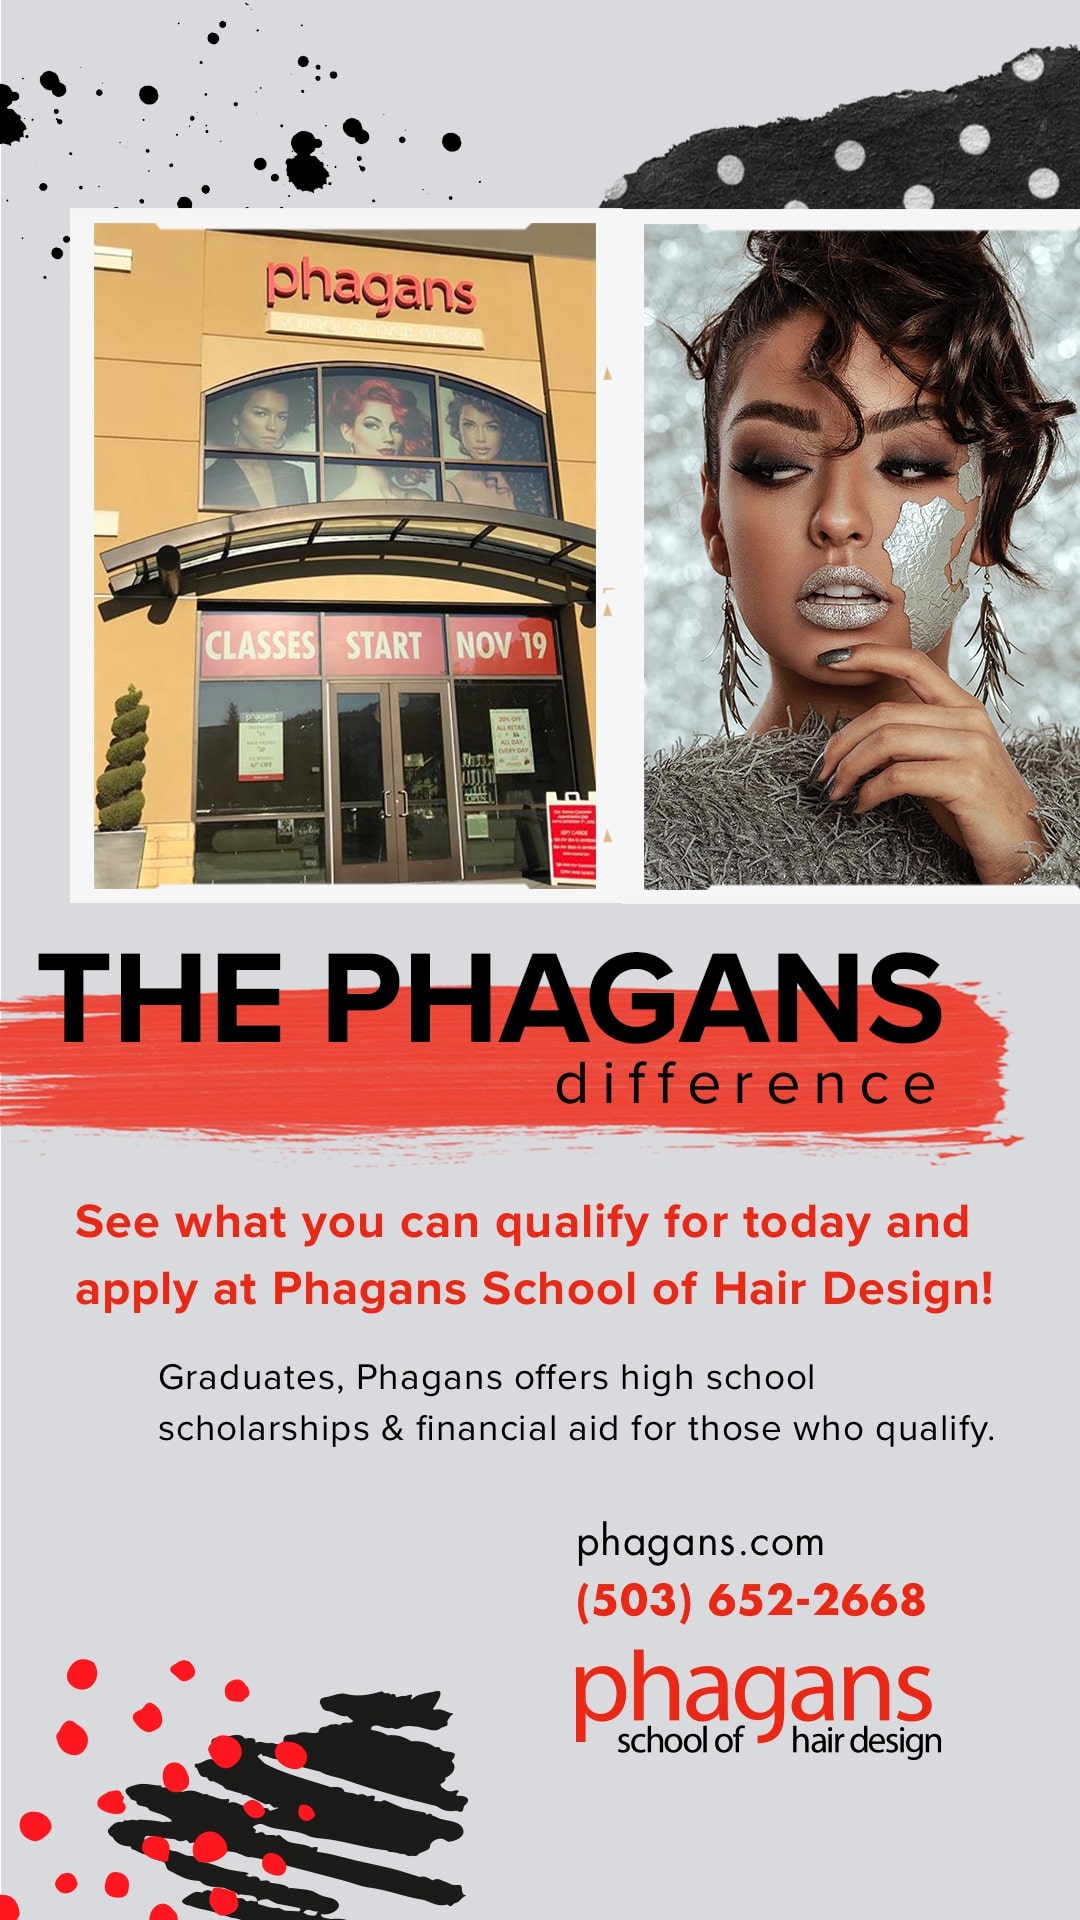 Contact Phagans to see what you may qualify for